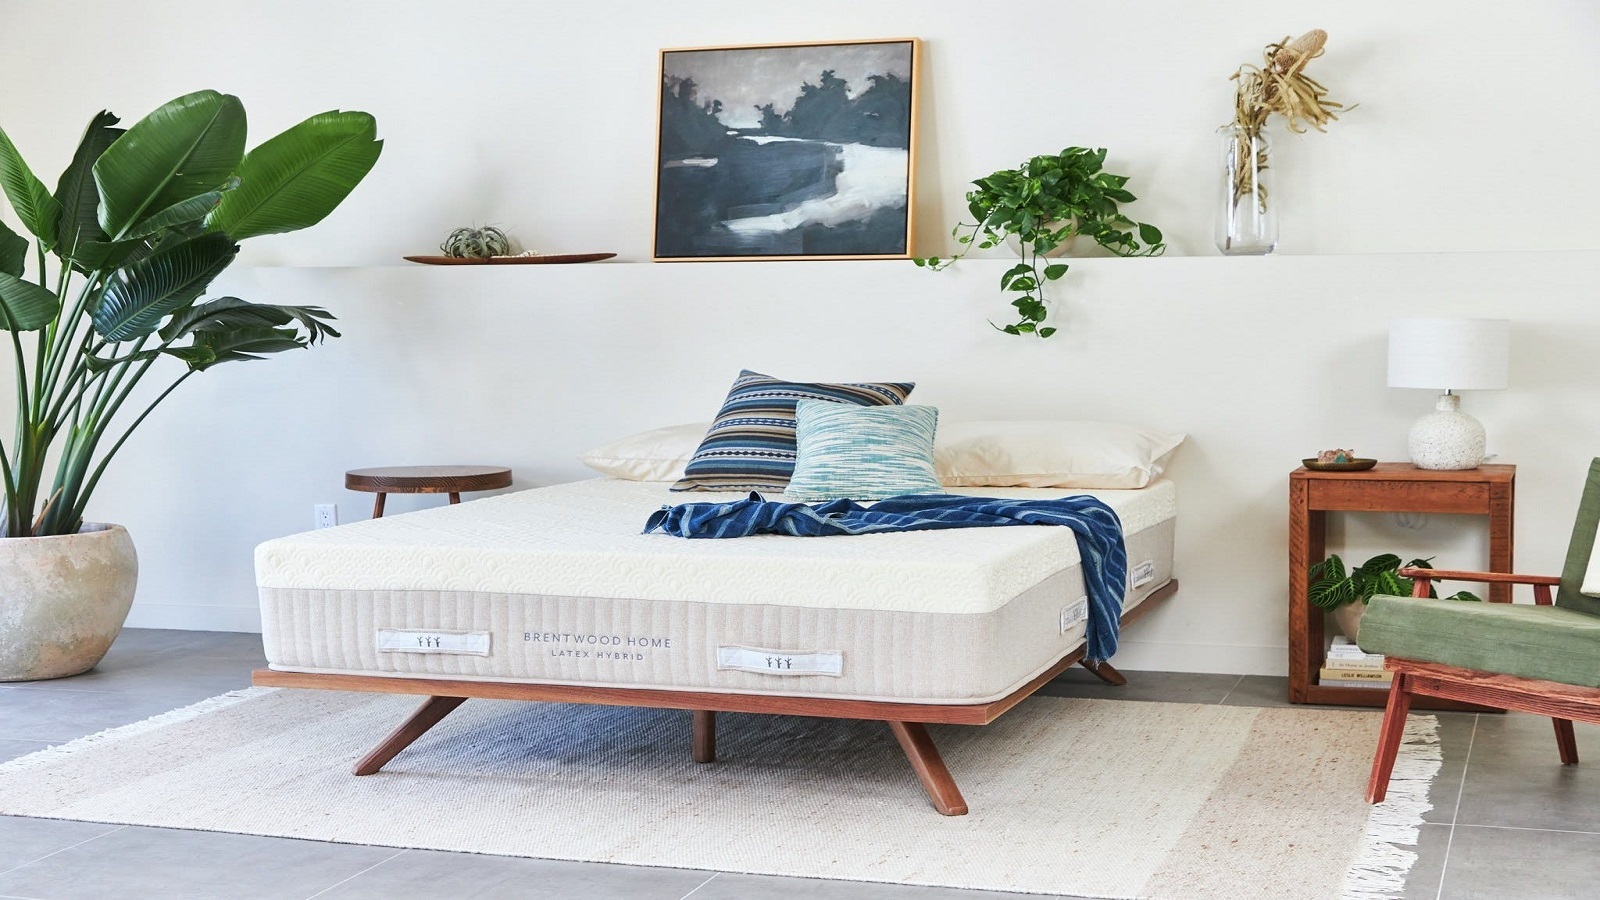 Brentwood Home Mattress Review: Would You Buy It?